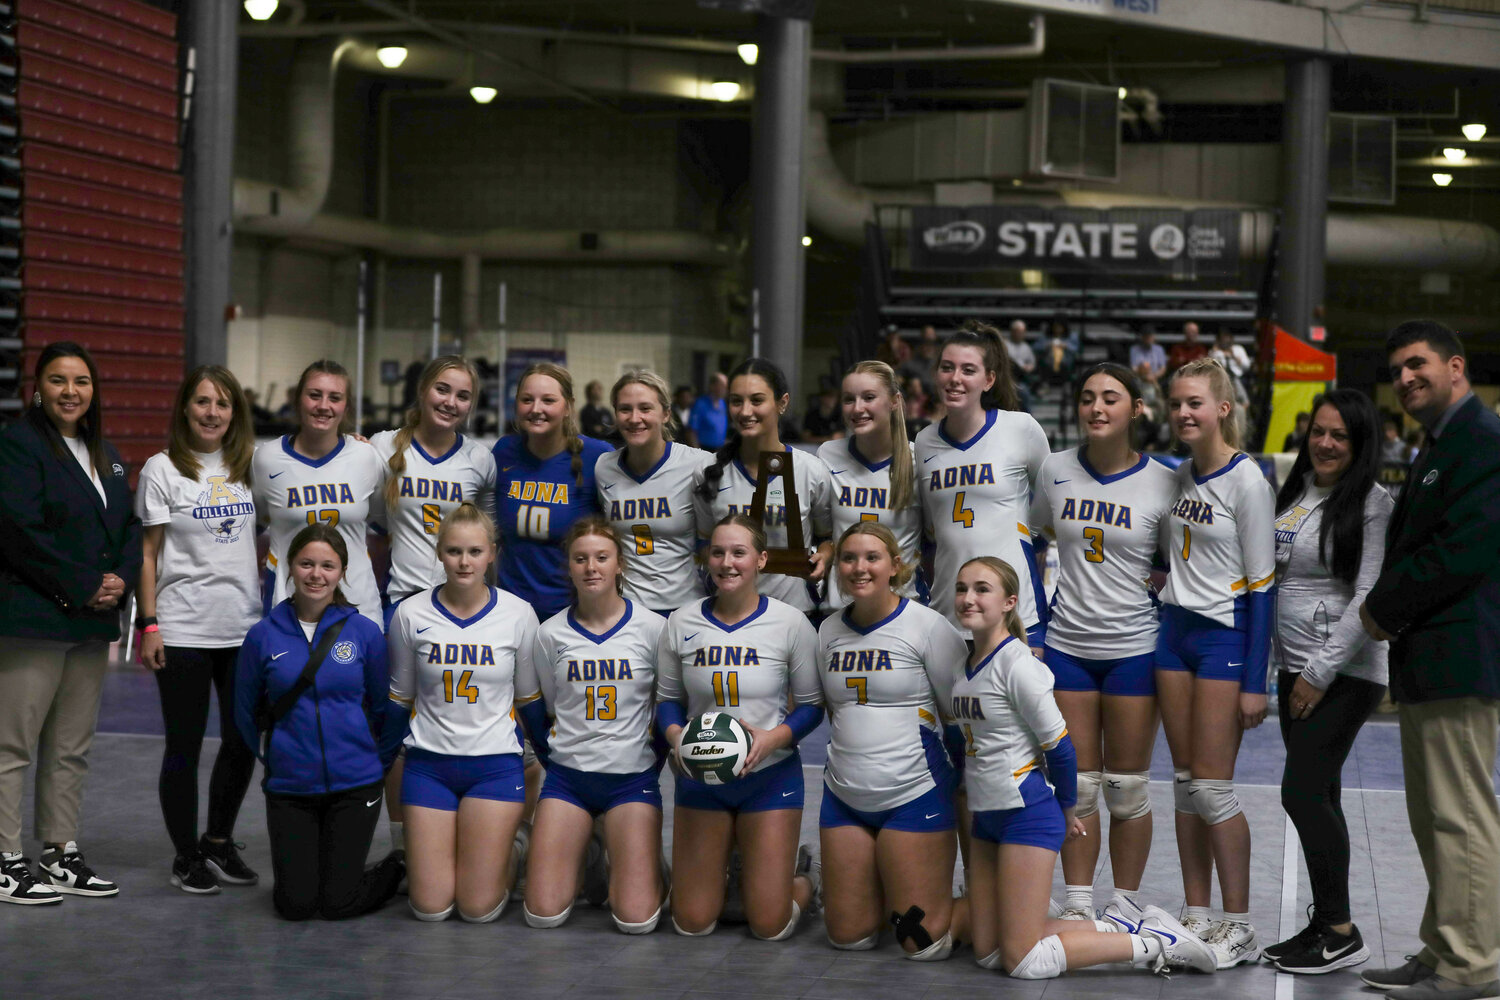 The Pirates pose with the fifth-place trophy after defeating Okanogan in the state tournament on Nov. 9 in Yakima.